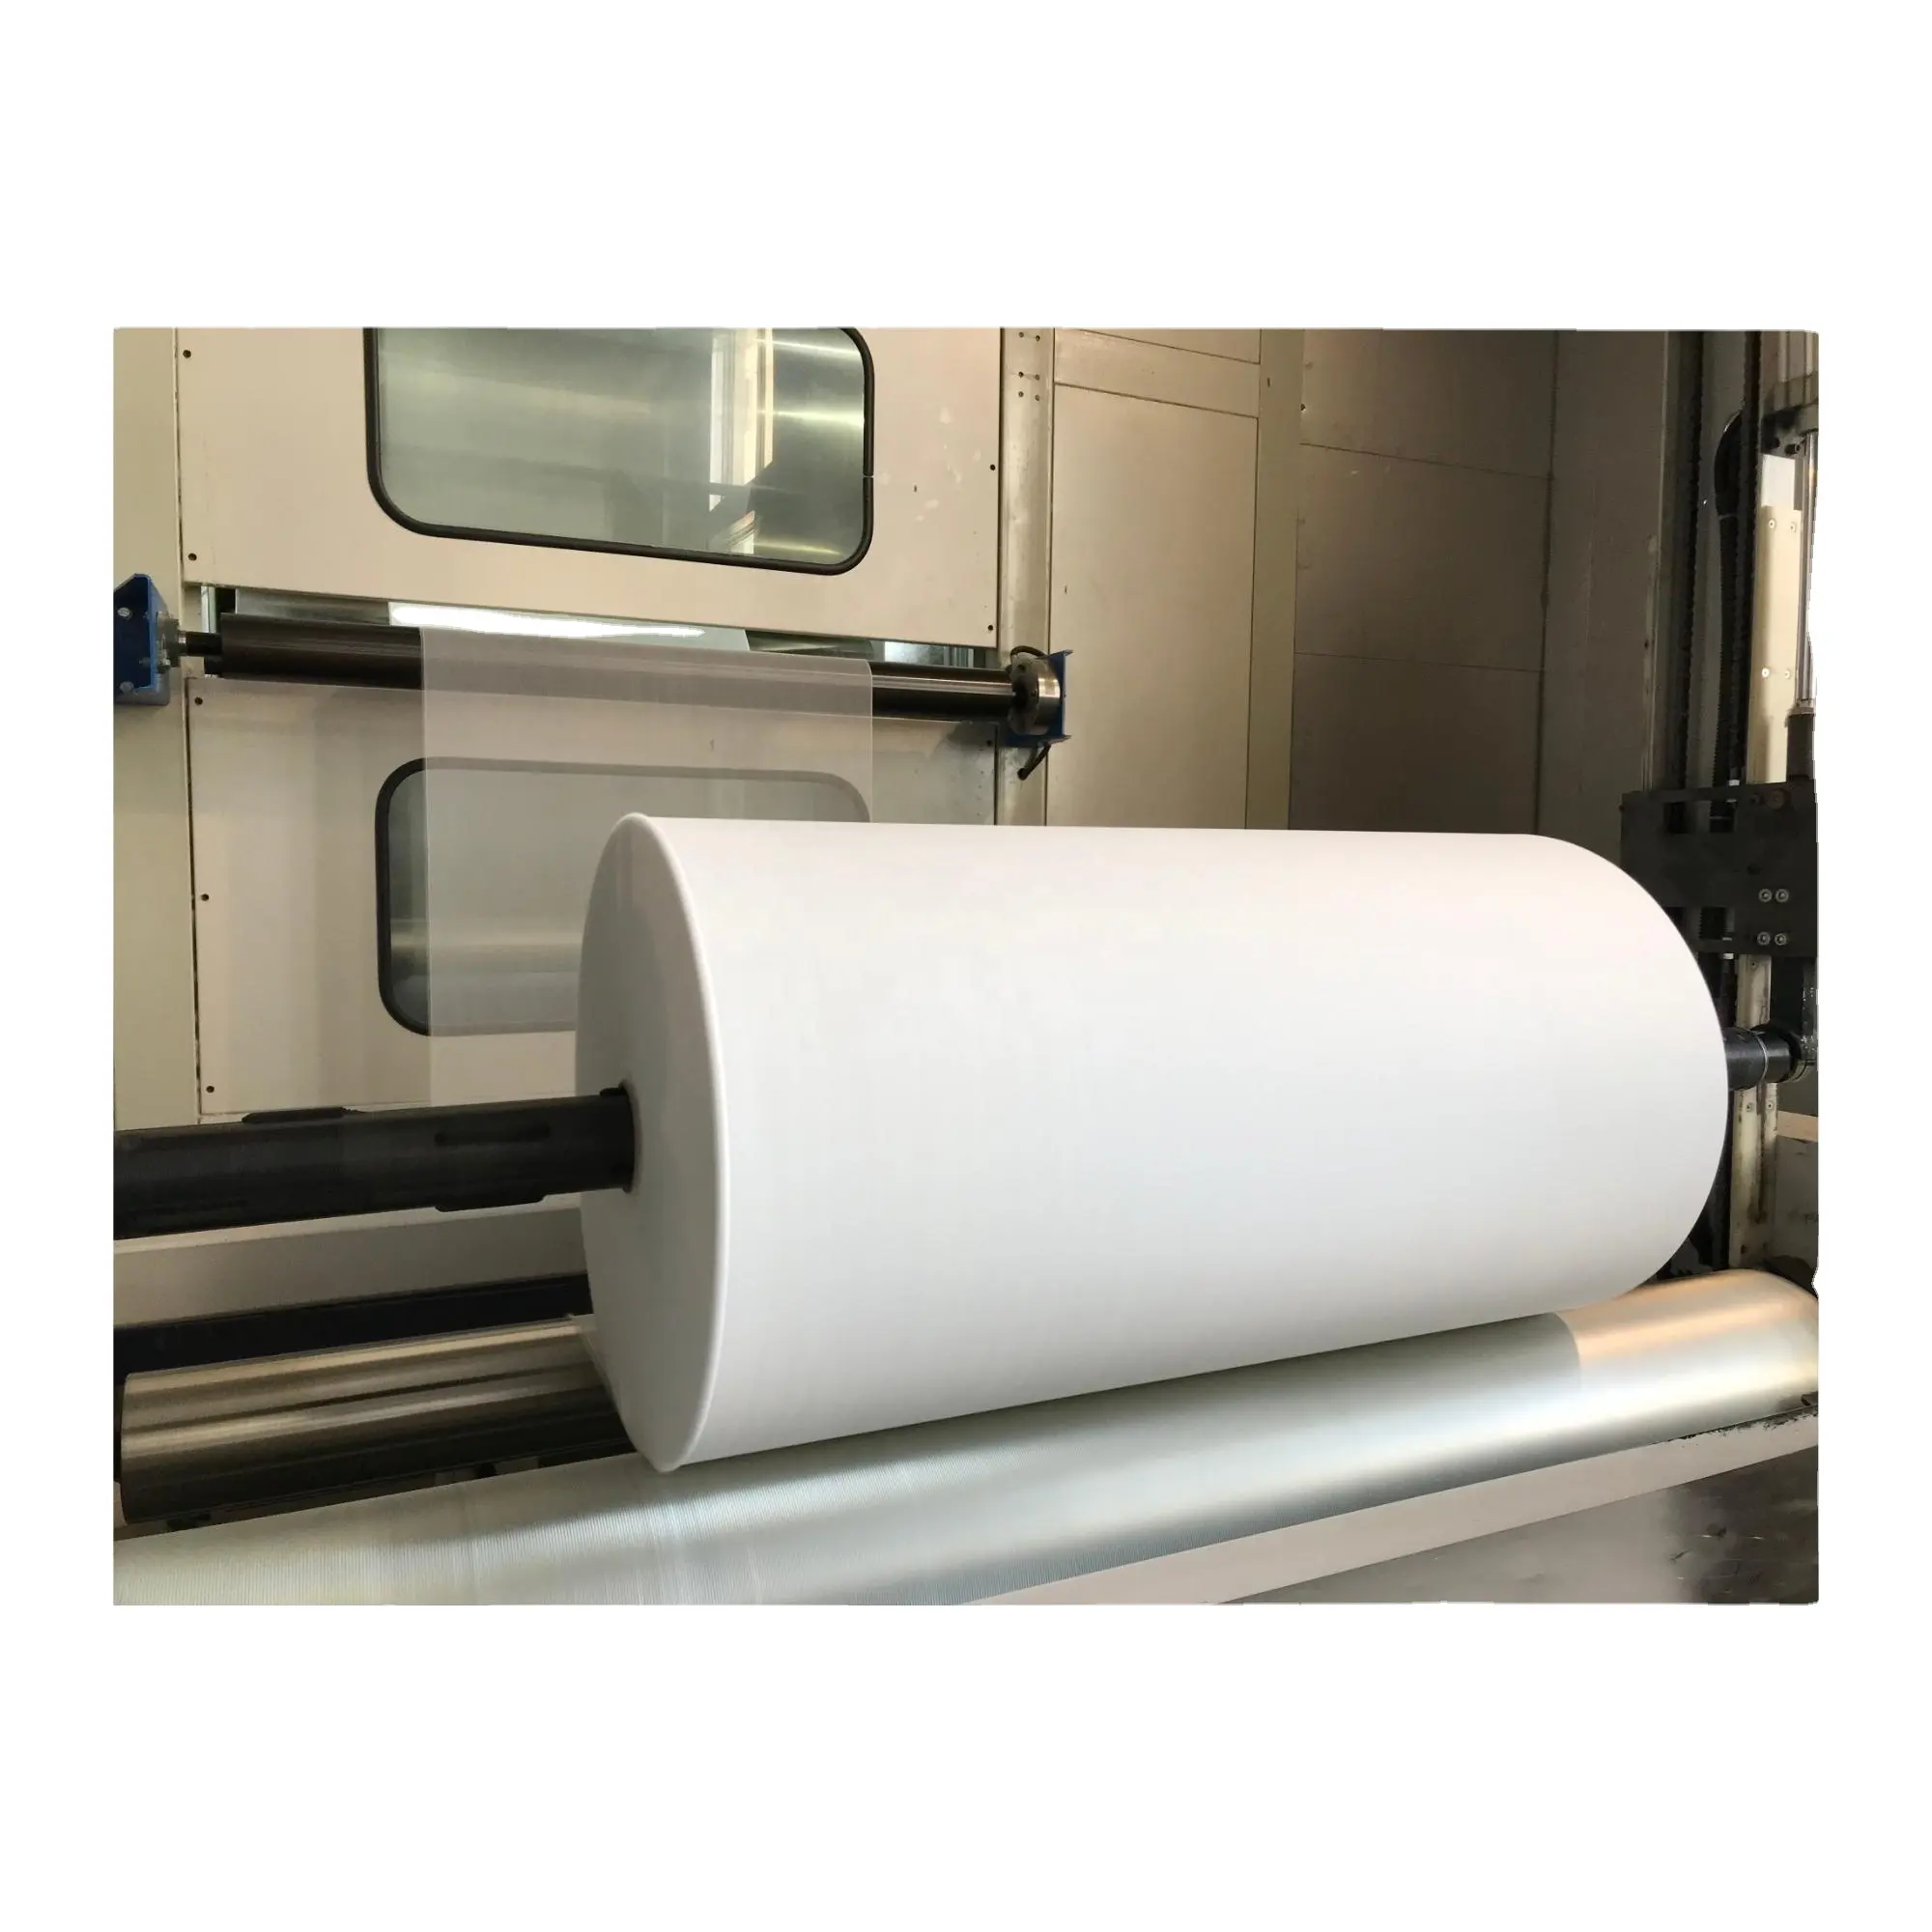 Surgical Sterile Hydrophilic Medical Cotton Absorbent Gauze Rolls Jumbo Big Roll 120cm x 1000m Manufacturer Gauze Roll